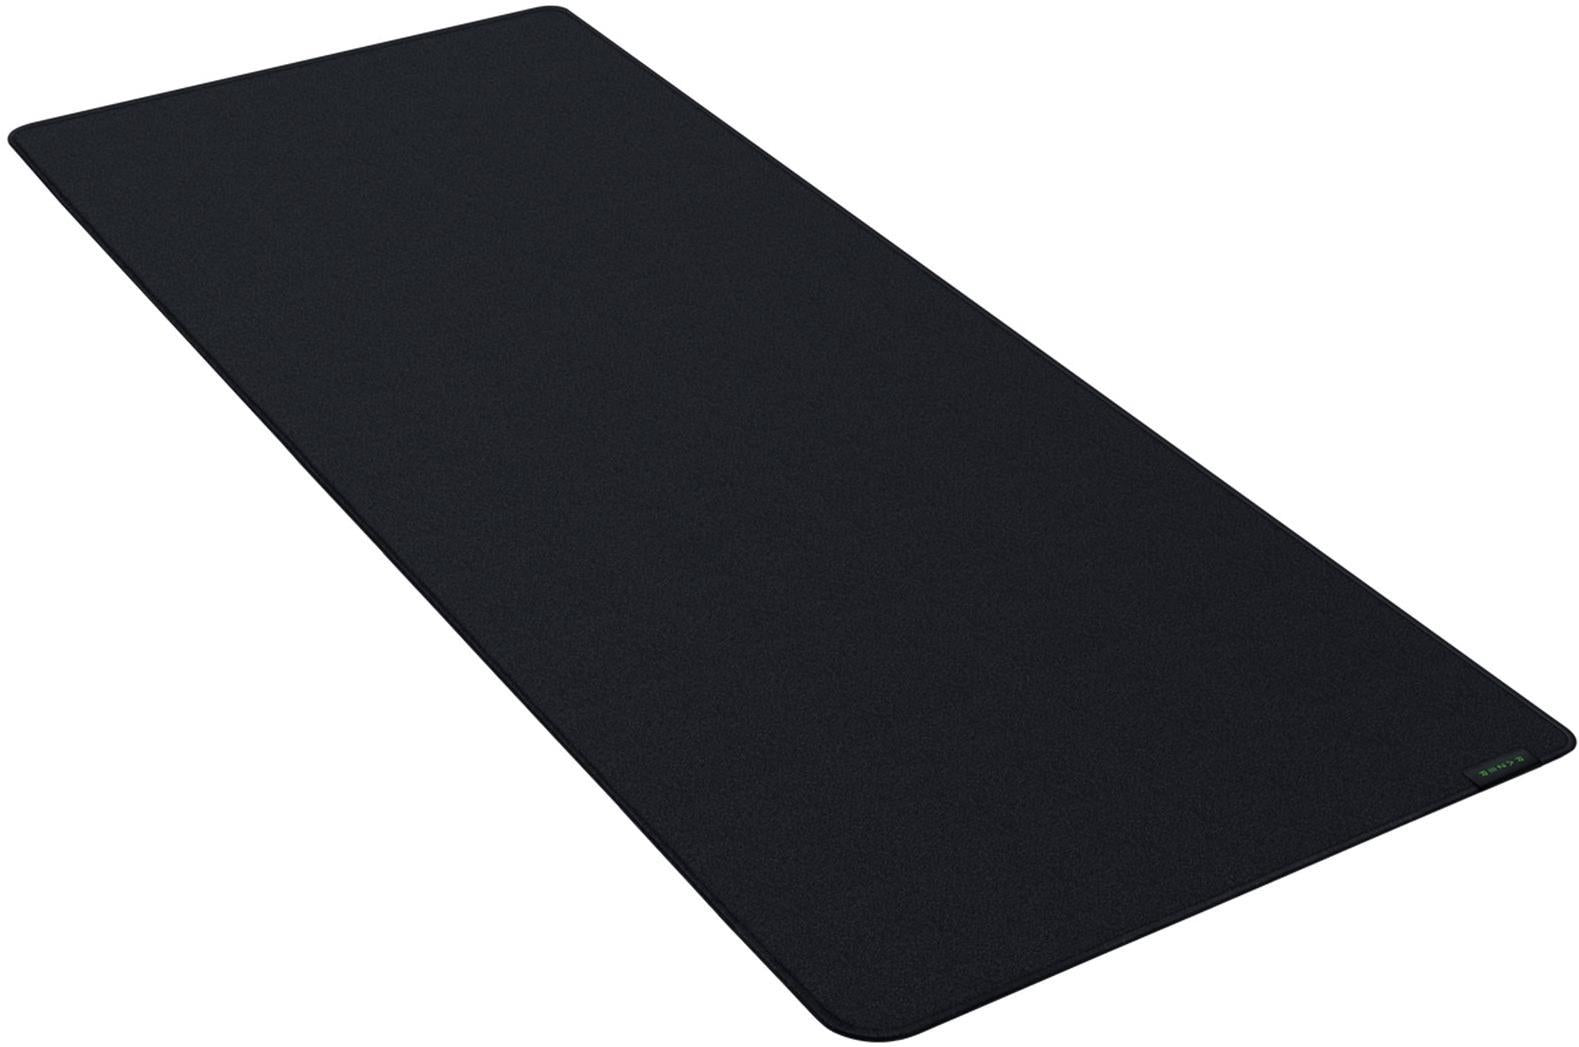 Razer Strider Hybrid Gaming Mouse Mat with A Soft Base and Smooth Glide XXL - Black